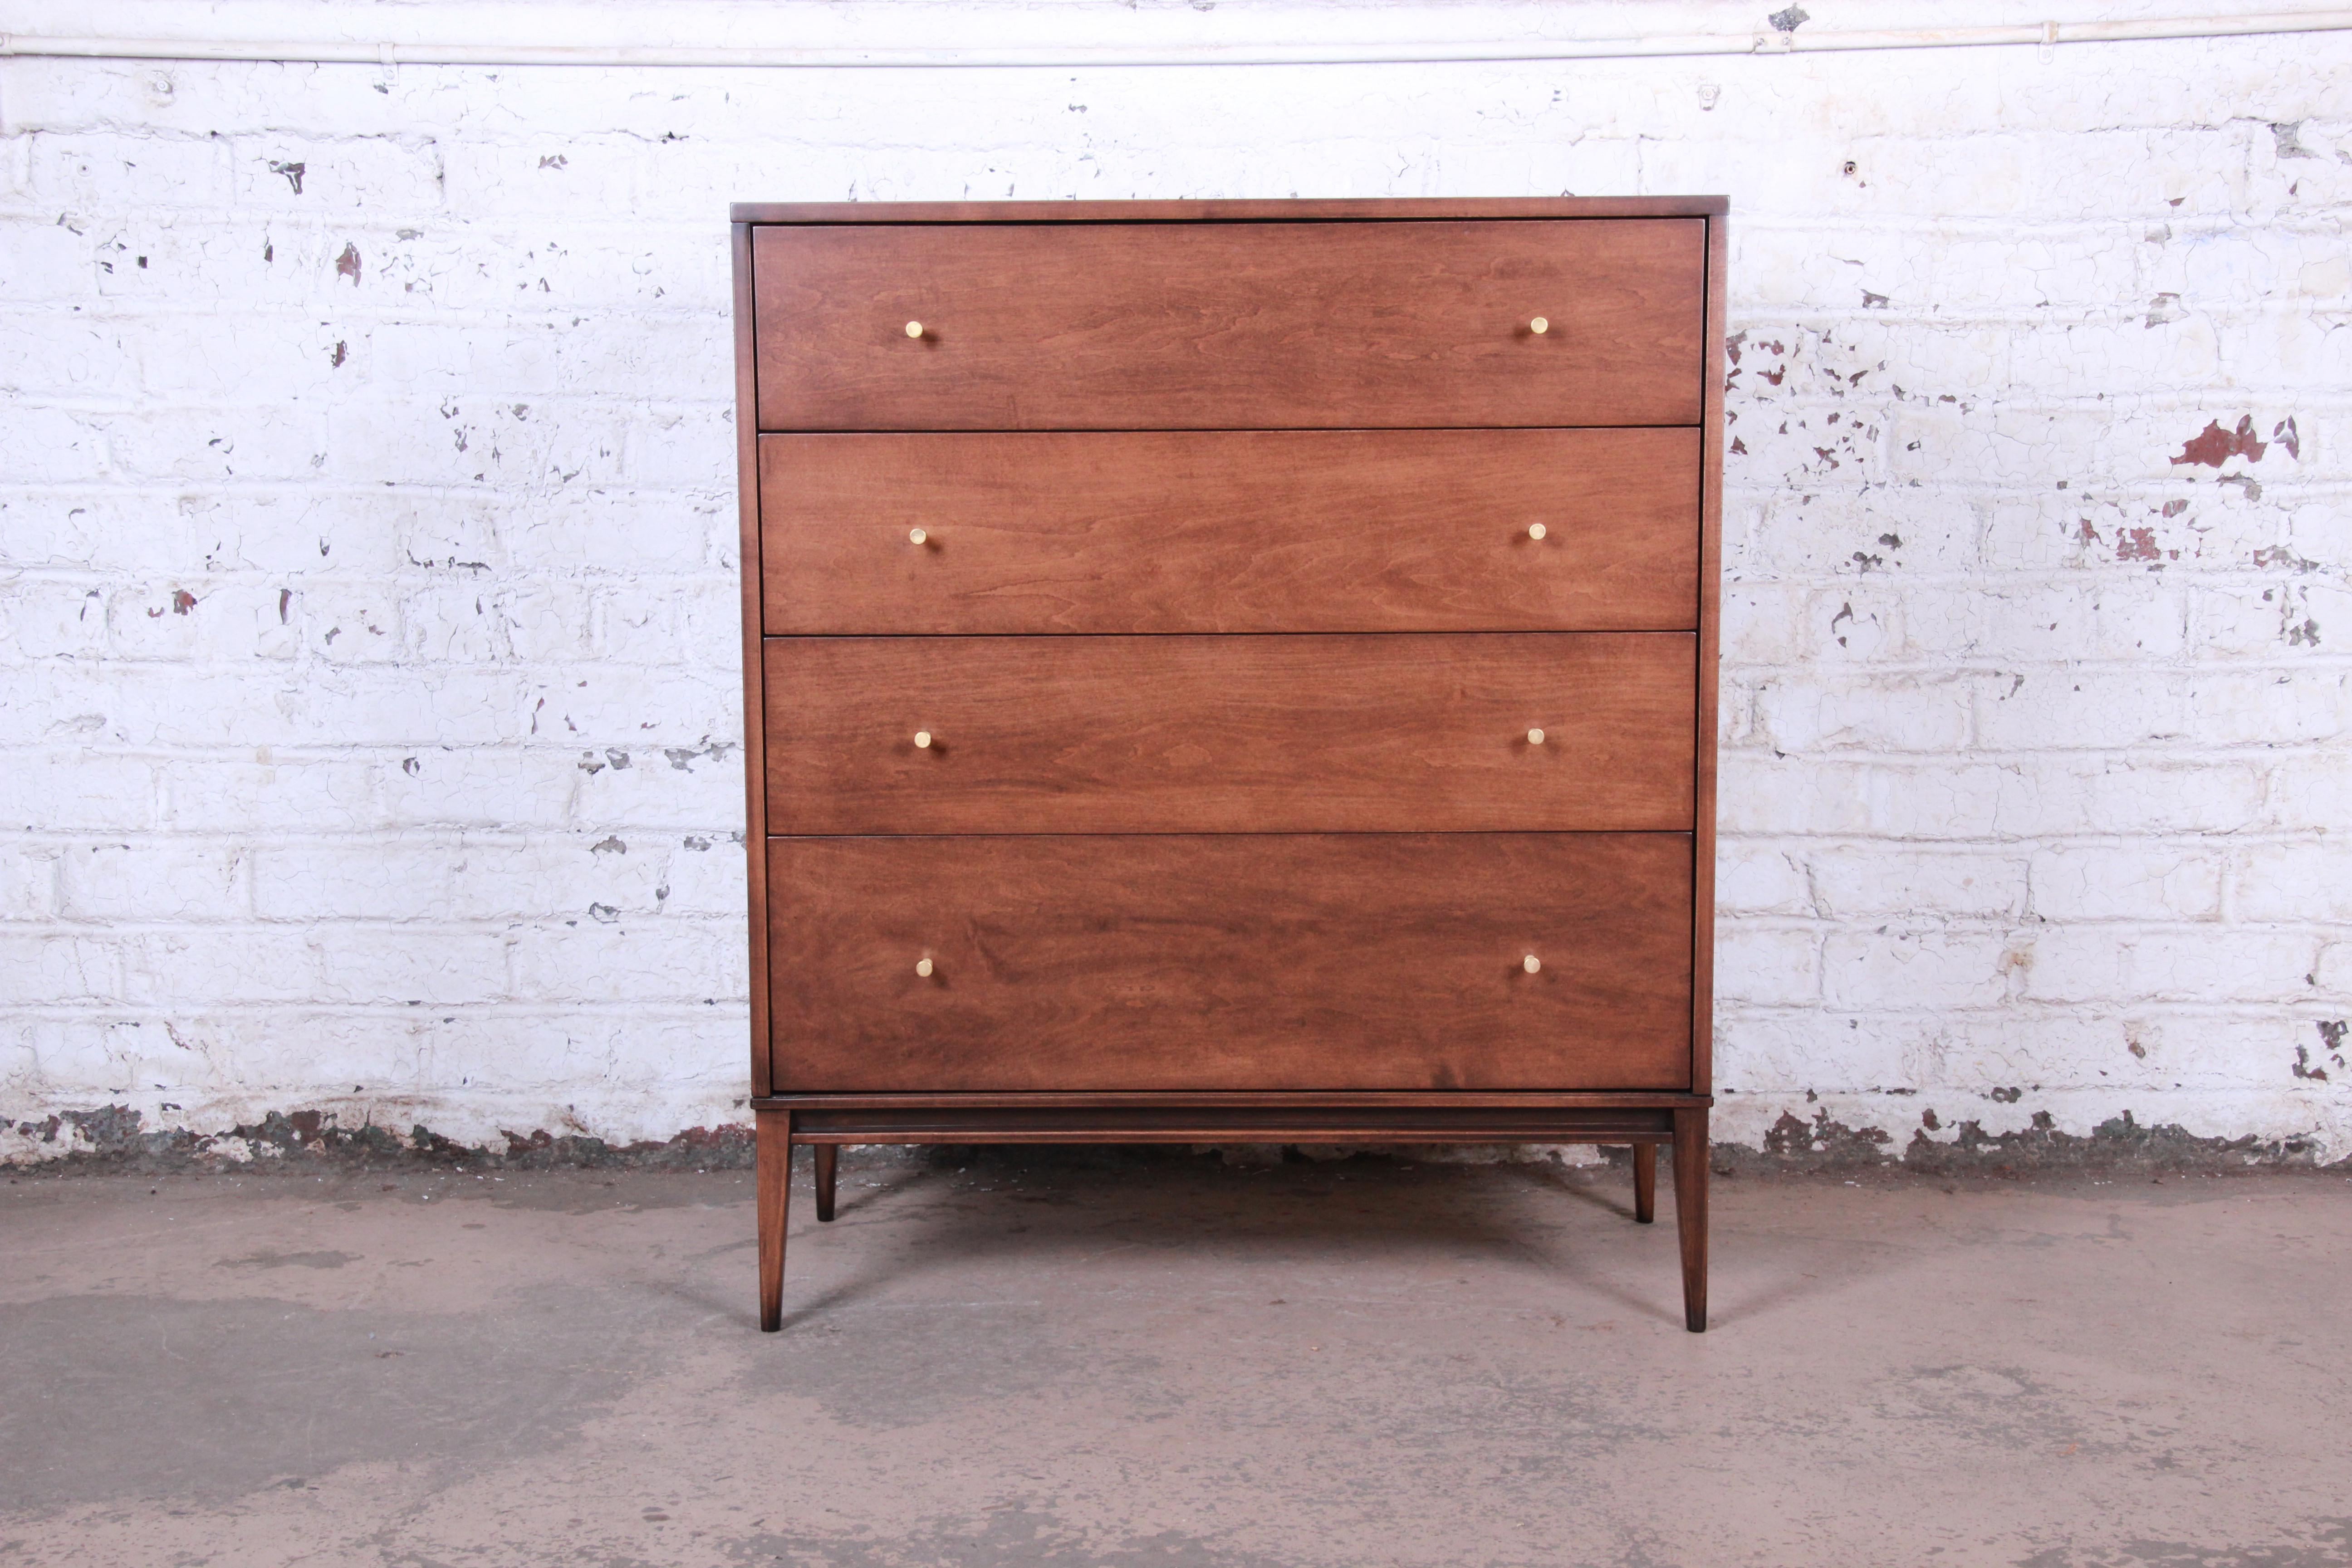 An exceptional mid-century modern highboy dresser designed by Paul McCobb for his Planner Group line for Winchendon Furniture. The dresser features solid birch wood construction and McCobb's iconic minimalist mid-century design. It offers ample room